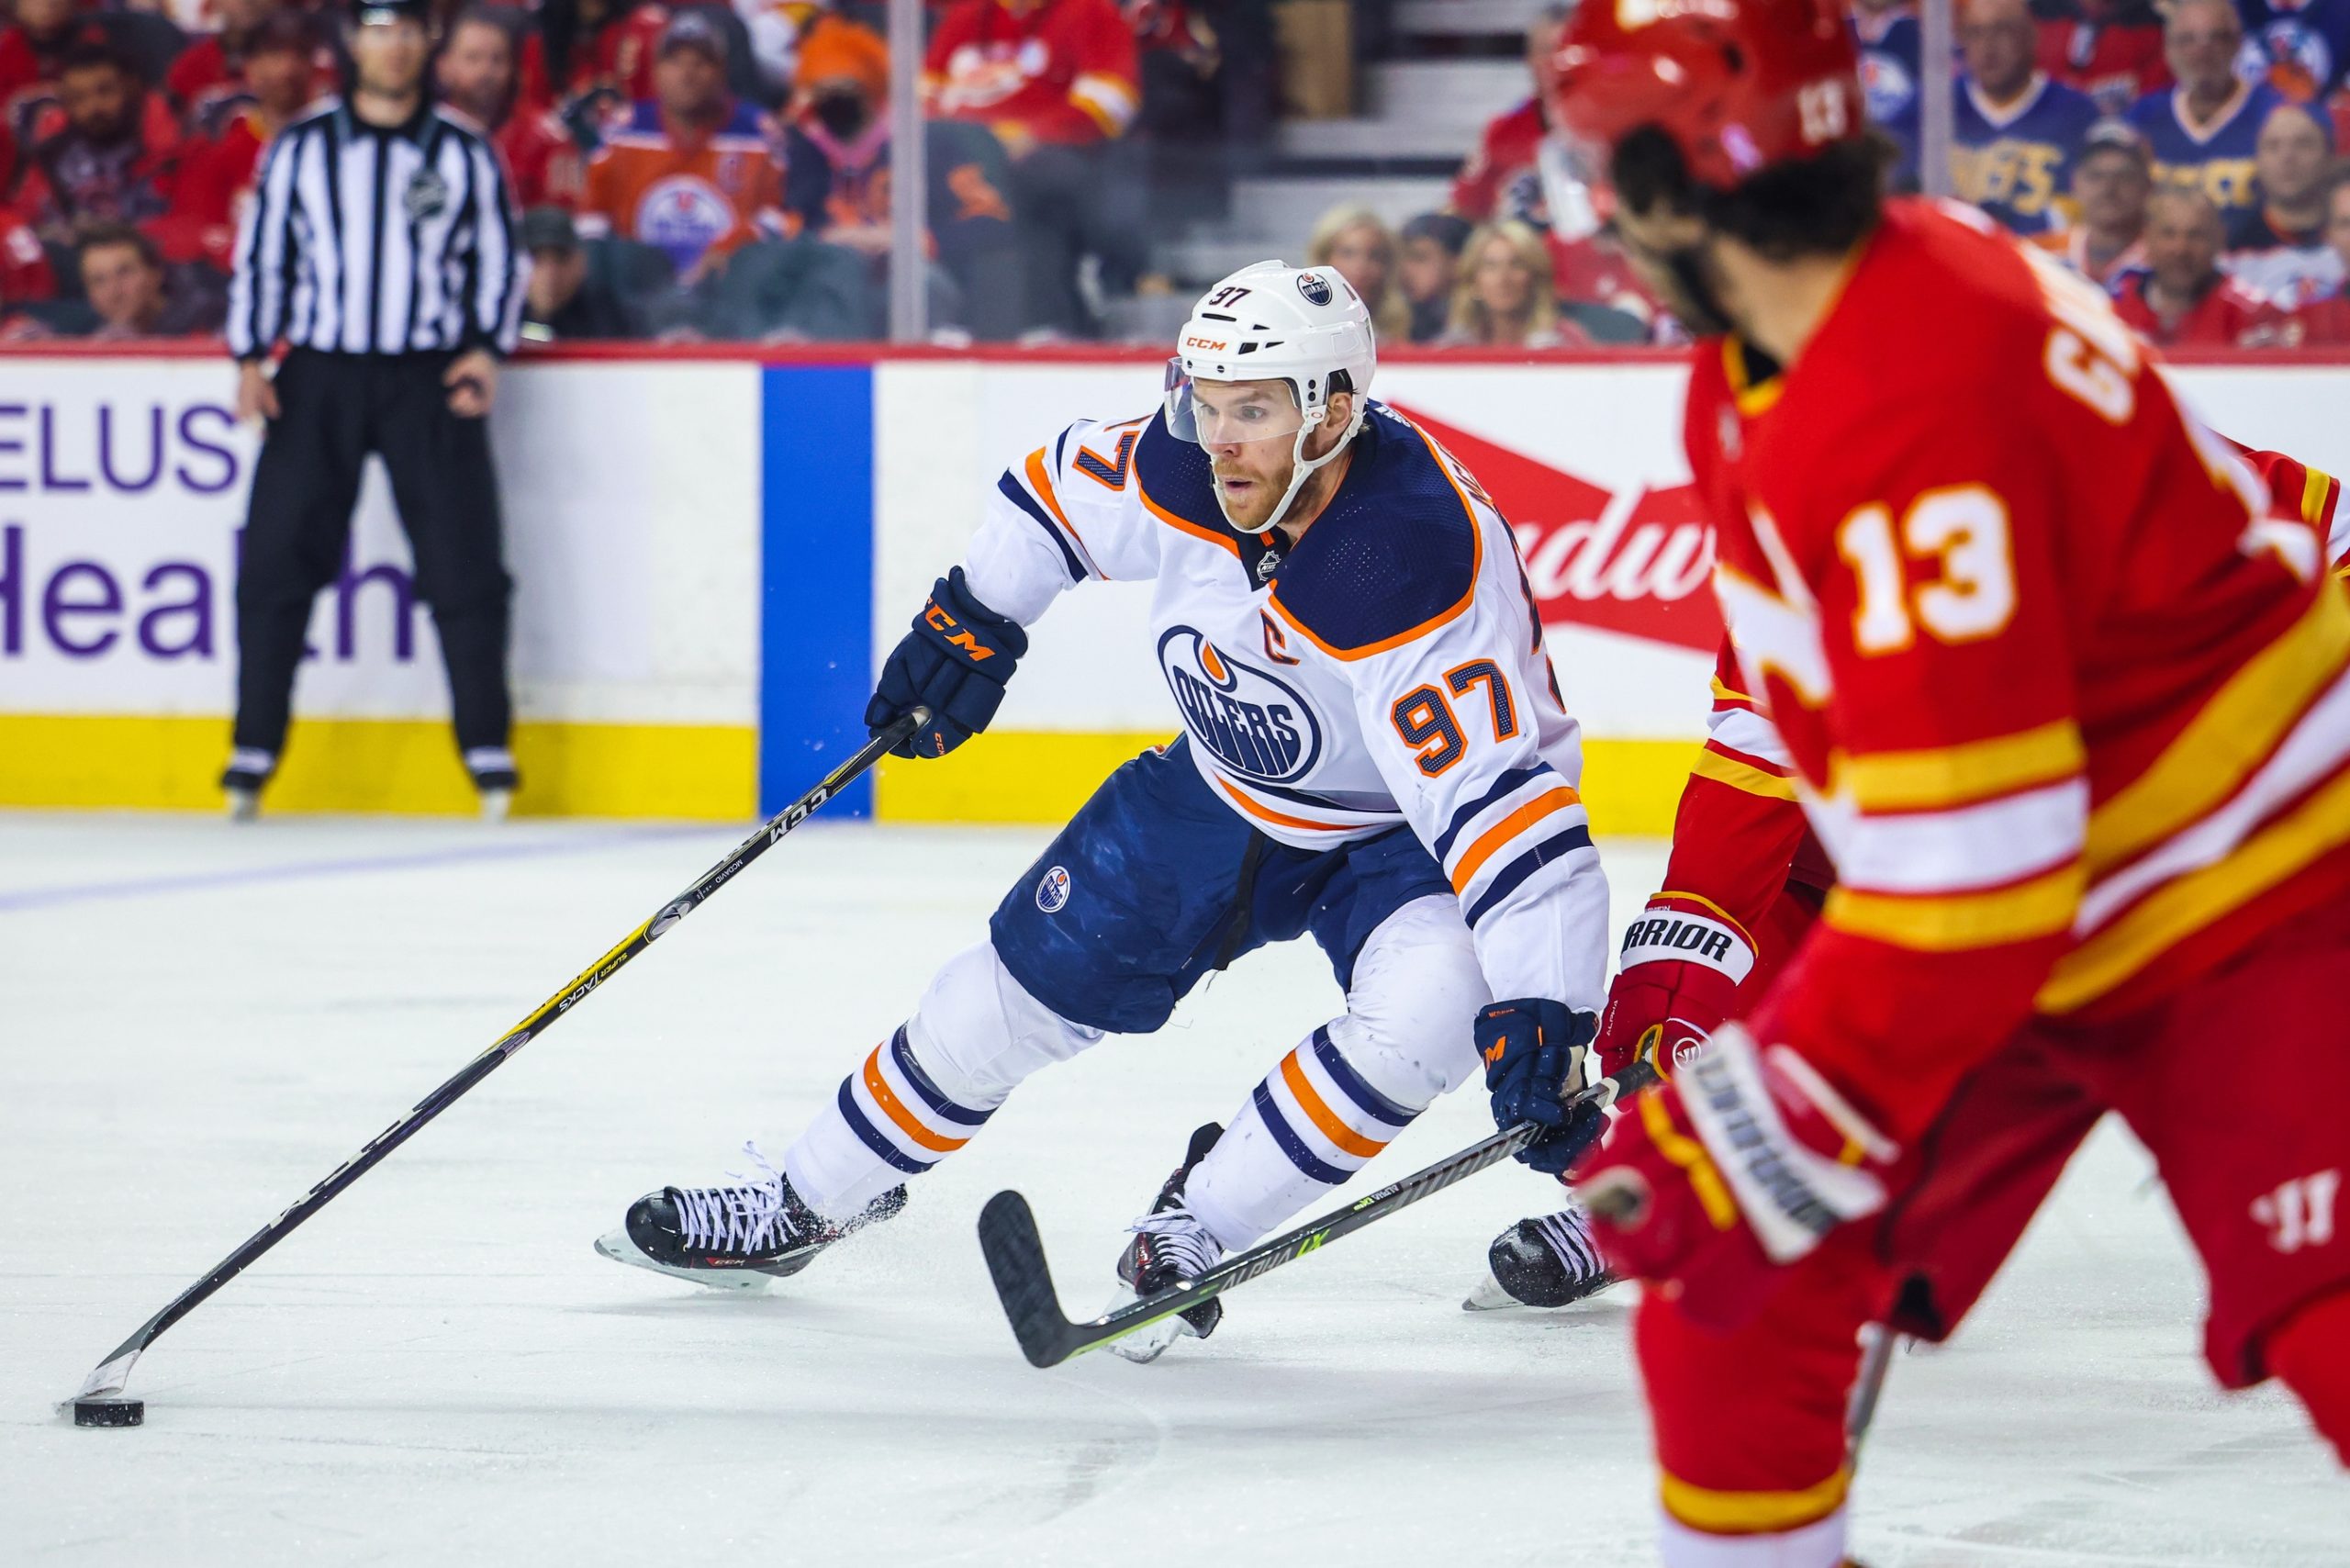 Flames Oilers Game 4 odds